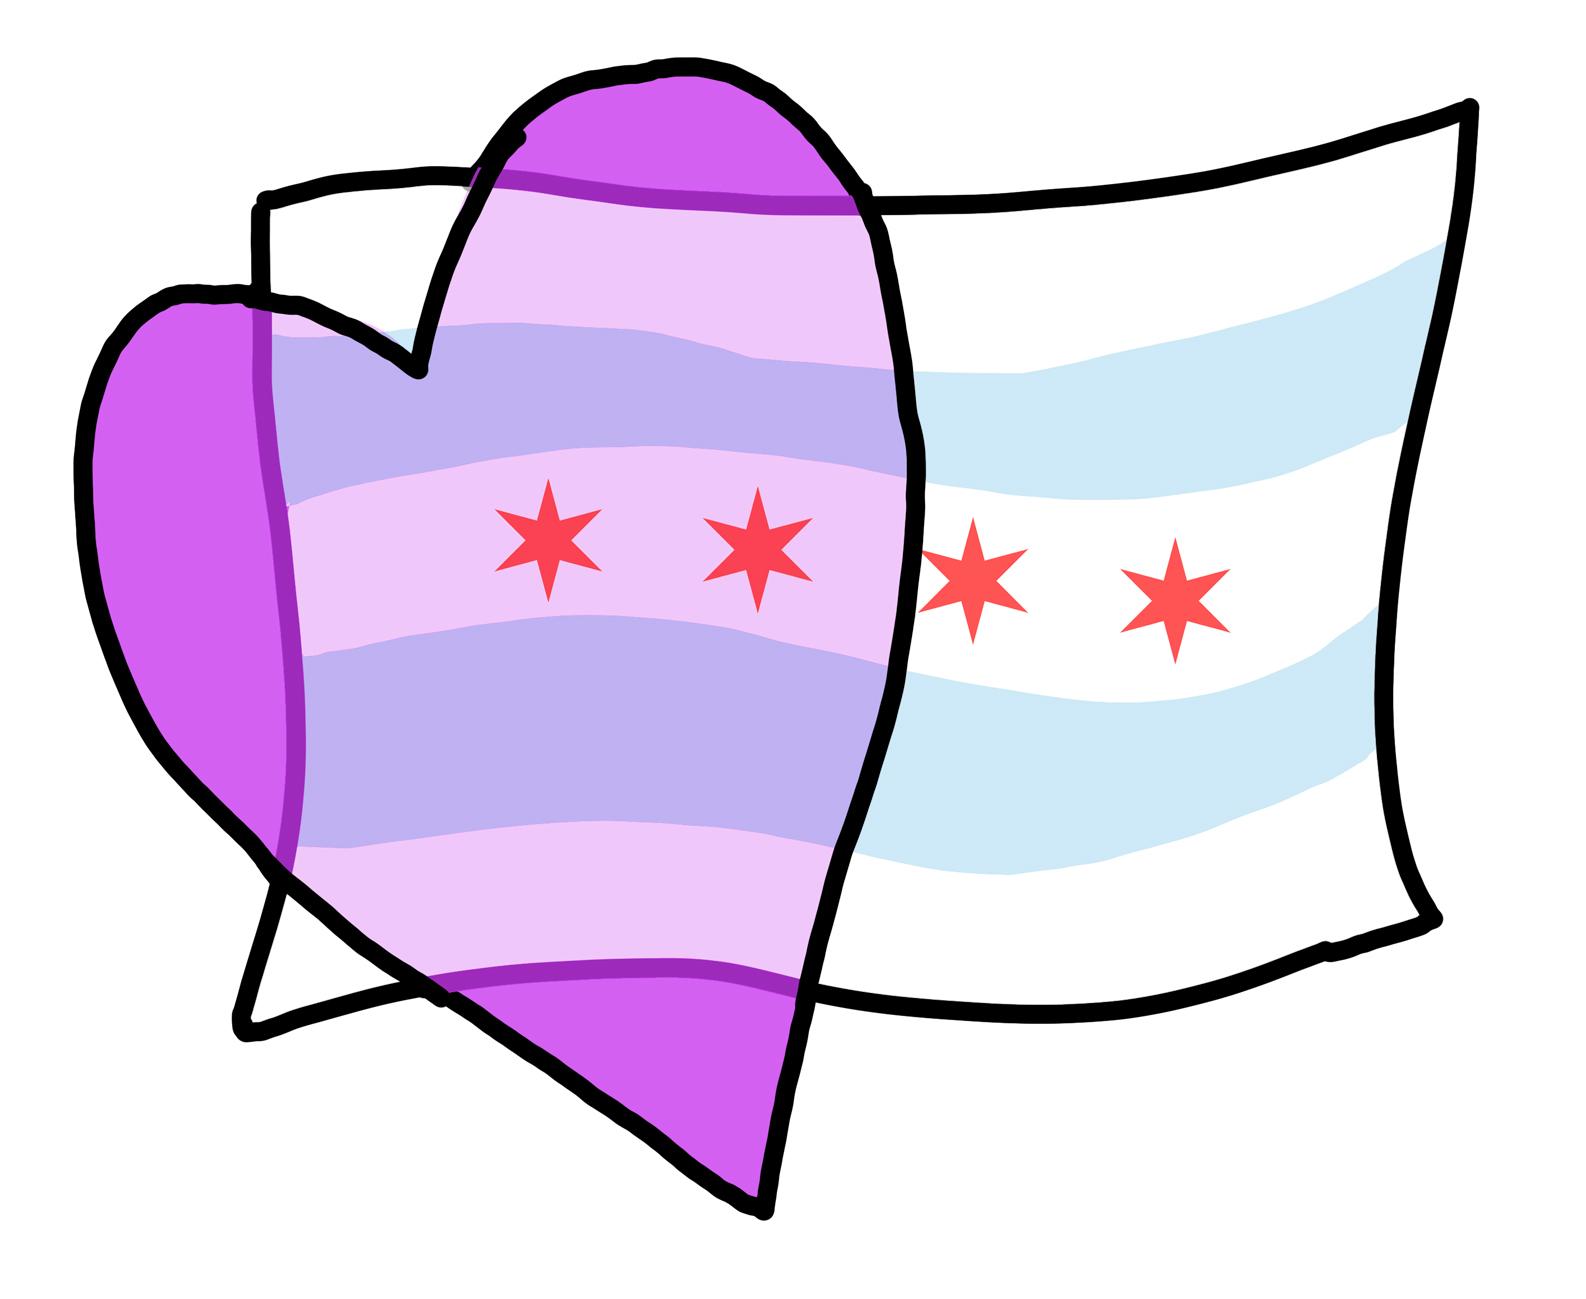 A simple illustration shows the Chicago flag overlapping a purple heart.